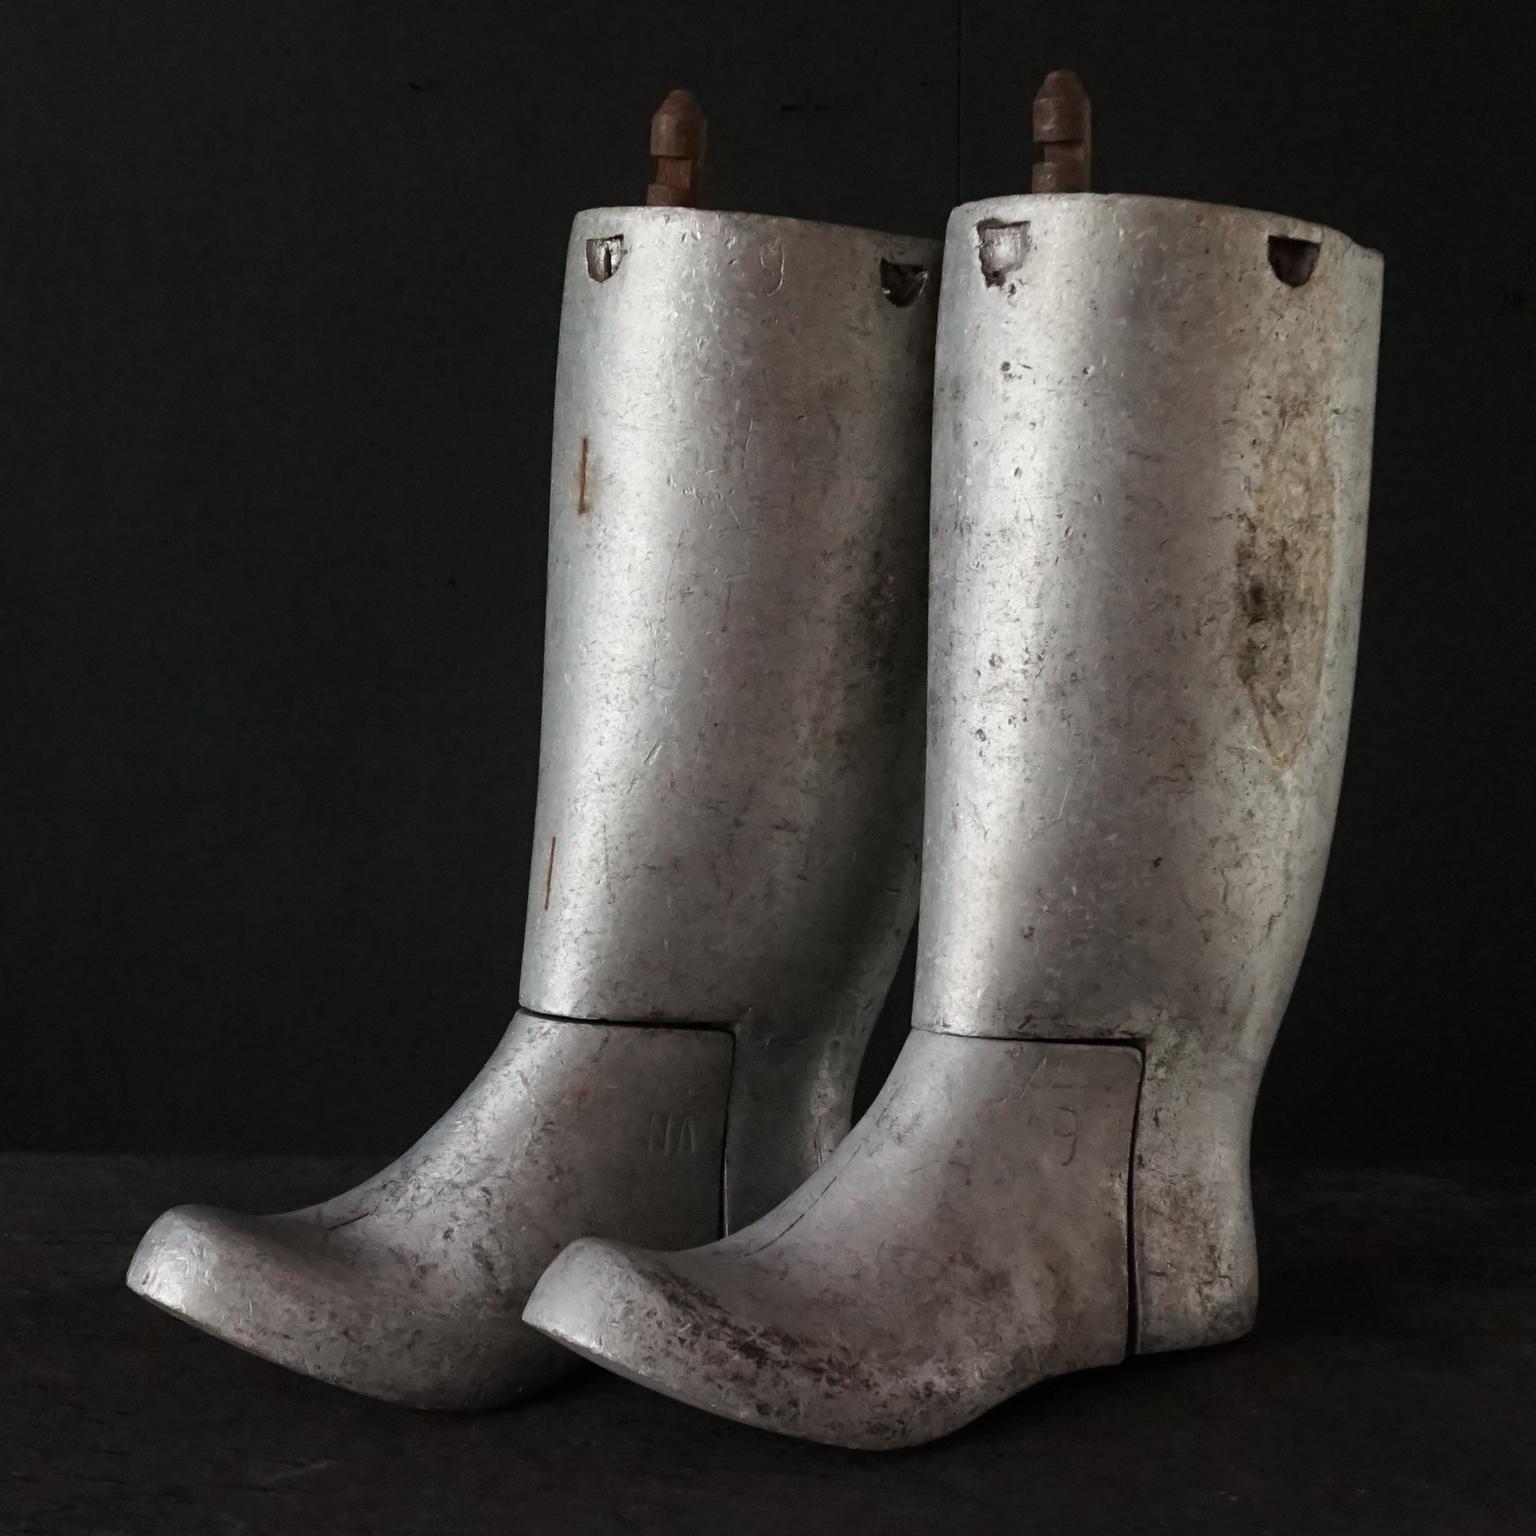 Nice decorative 1950s industrial cast aluminium industrial set of two left rubber boot moulds in size 9 men. They are not solid all the way but still very thick and heavy. 
Both stamped with factory numbers and mould info (NA, N, G and 9). 
The